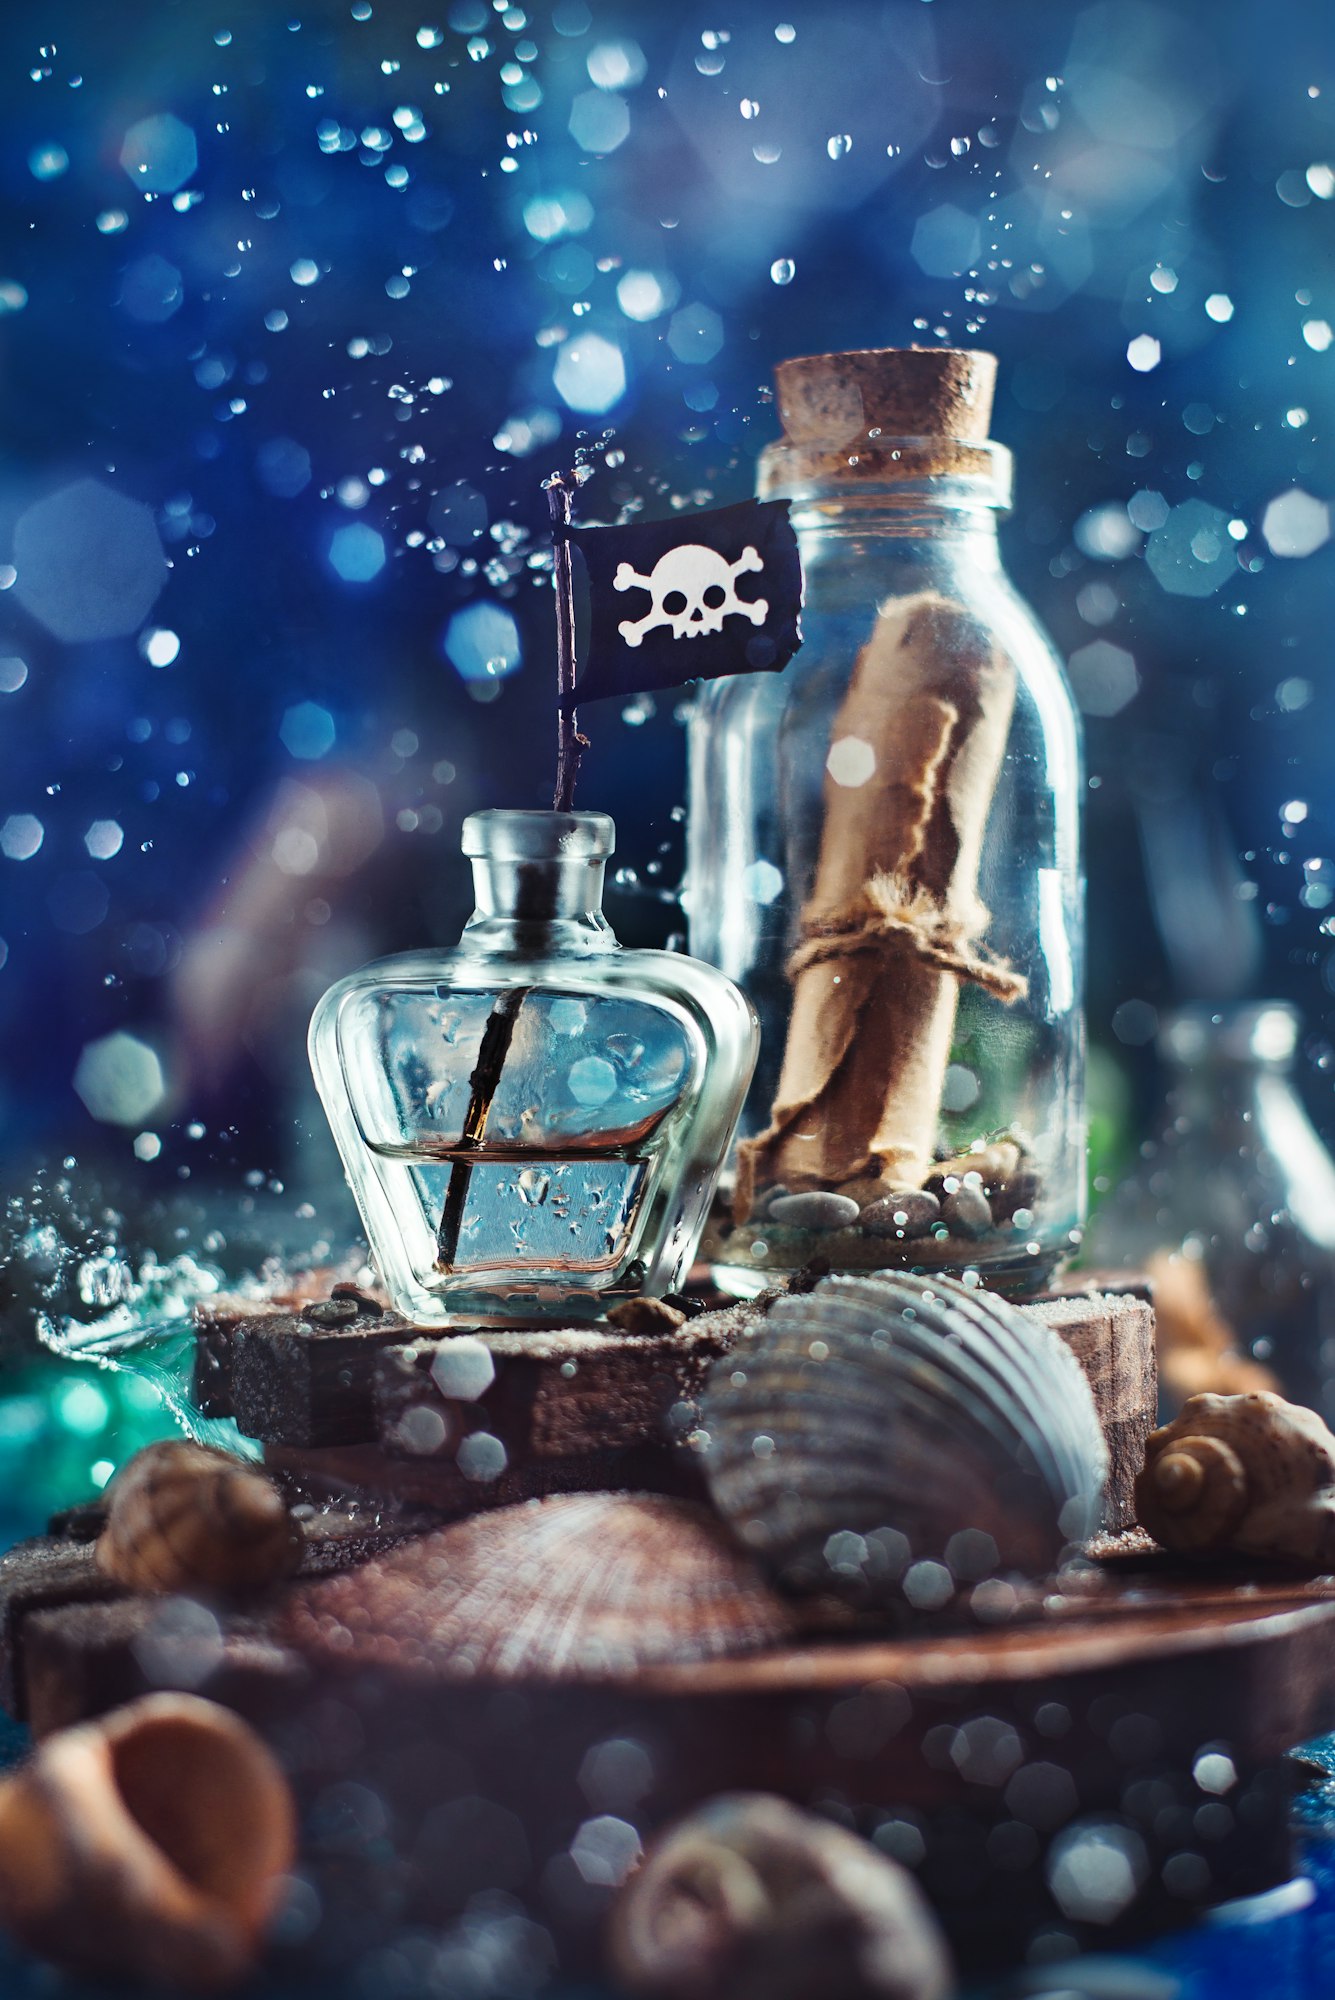 Bottle with a message, seashells and pirate flag